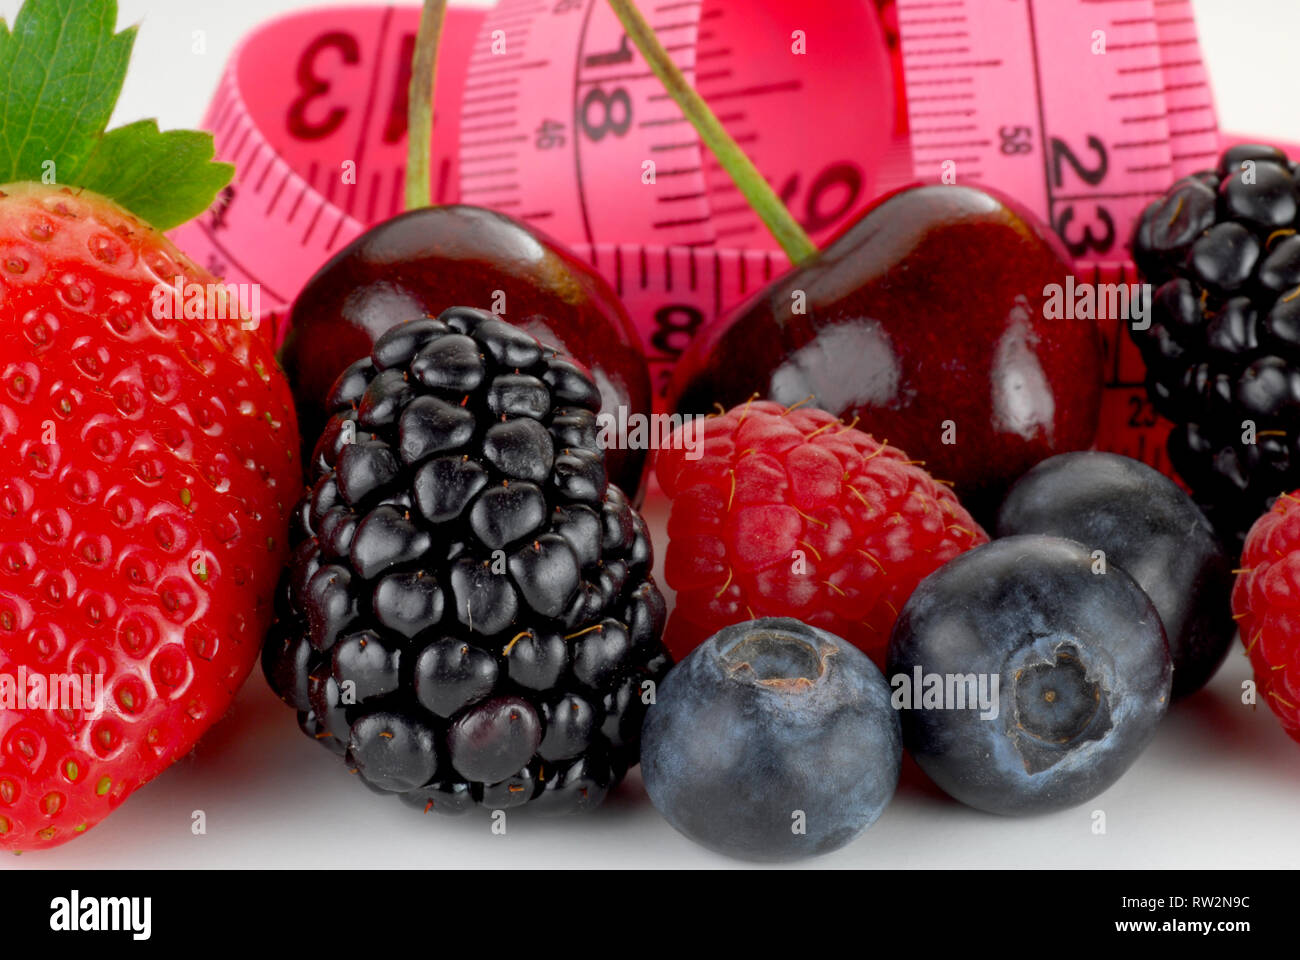 Extreme close-up image of berries Stock Photo